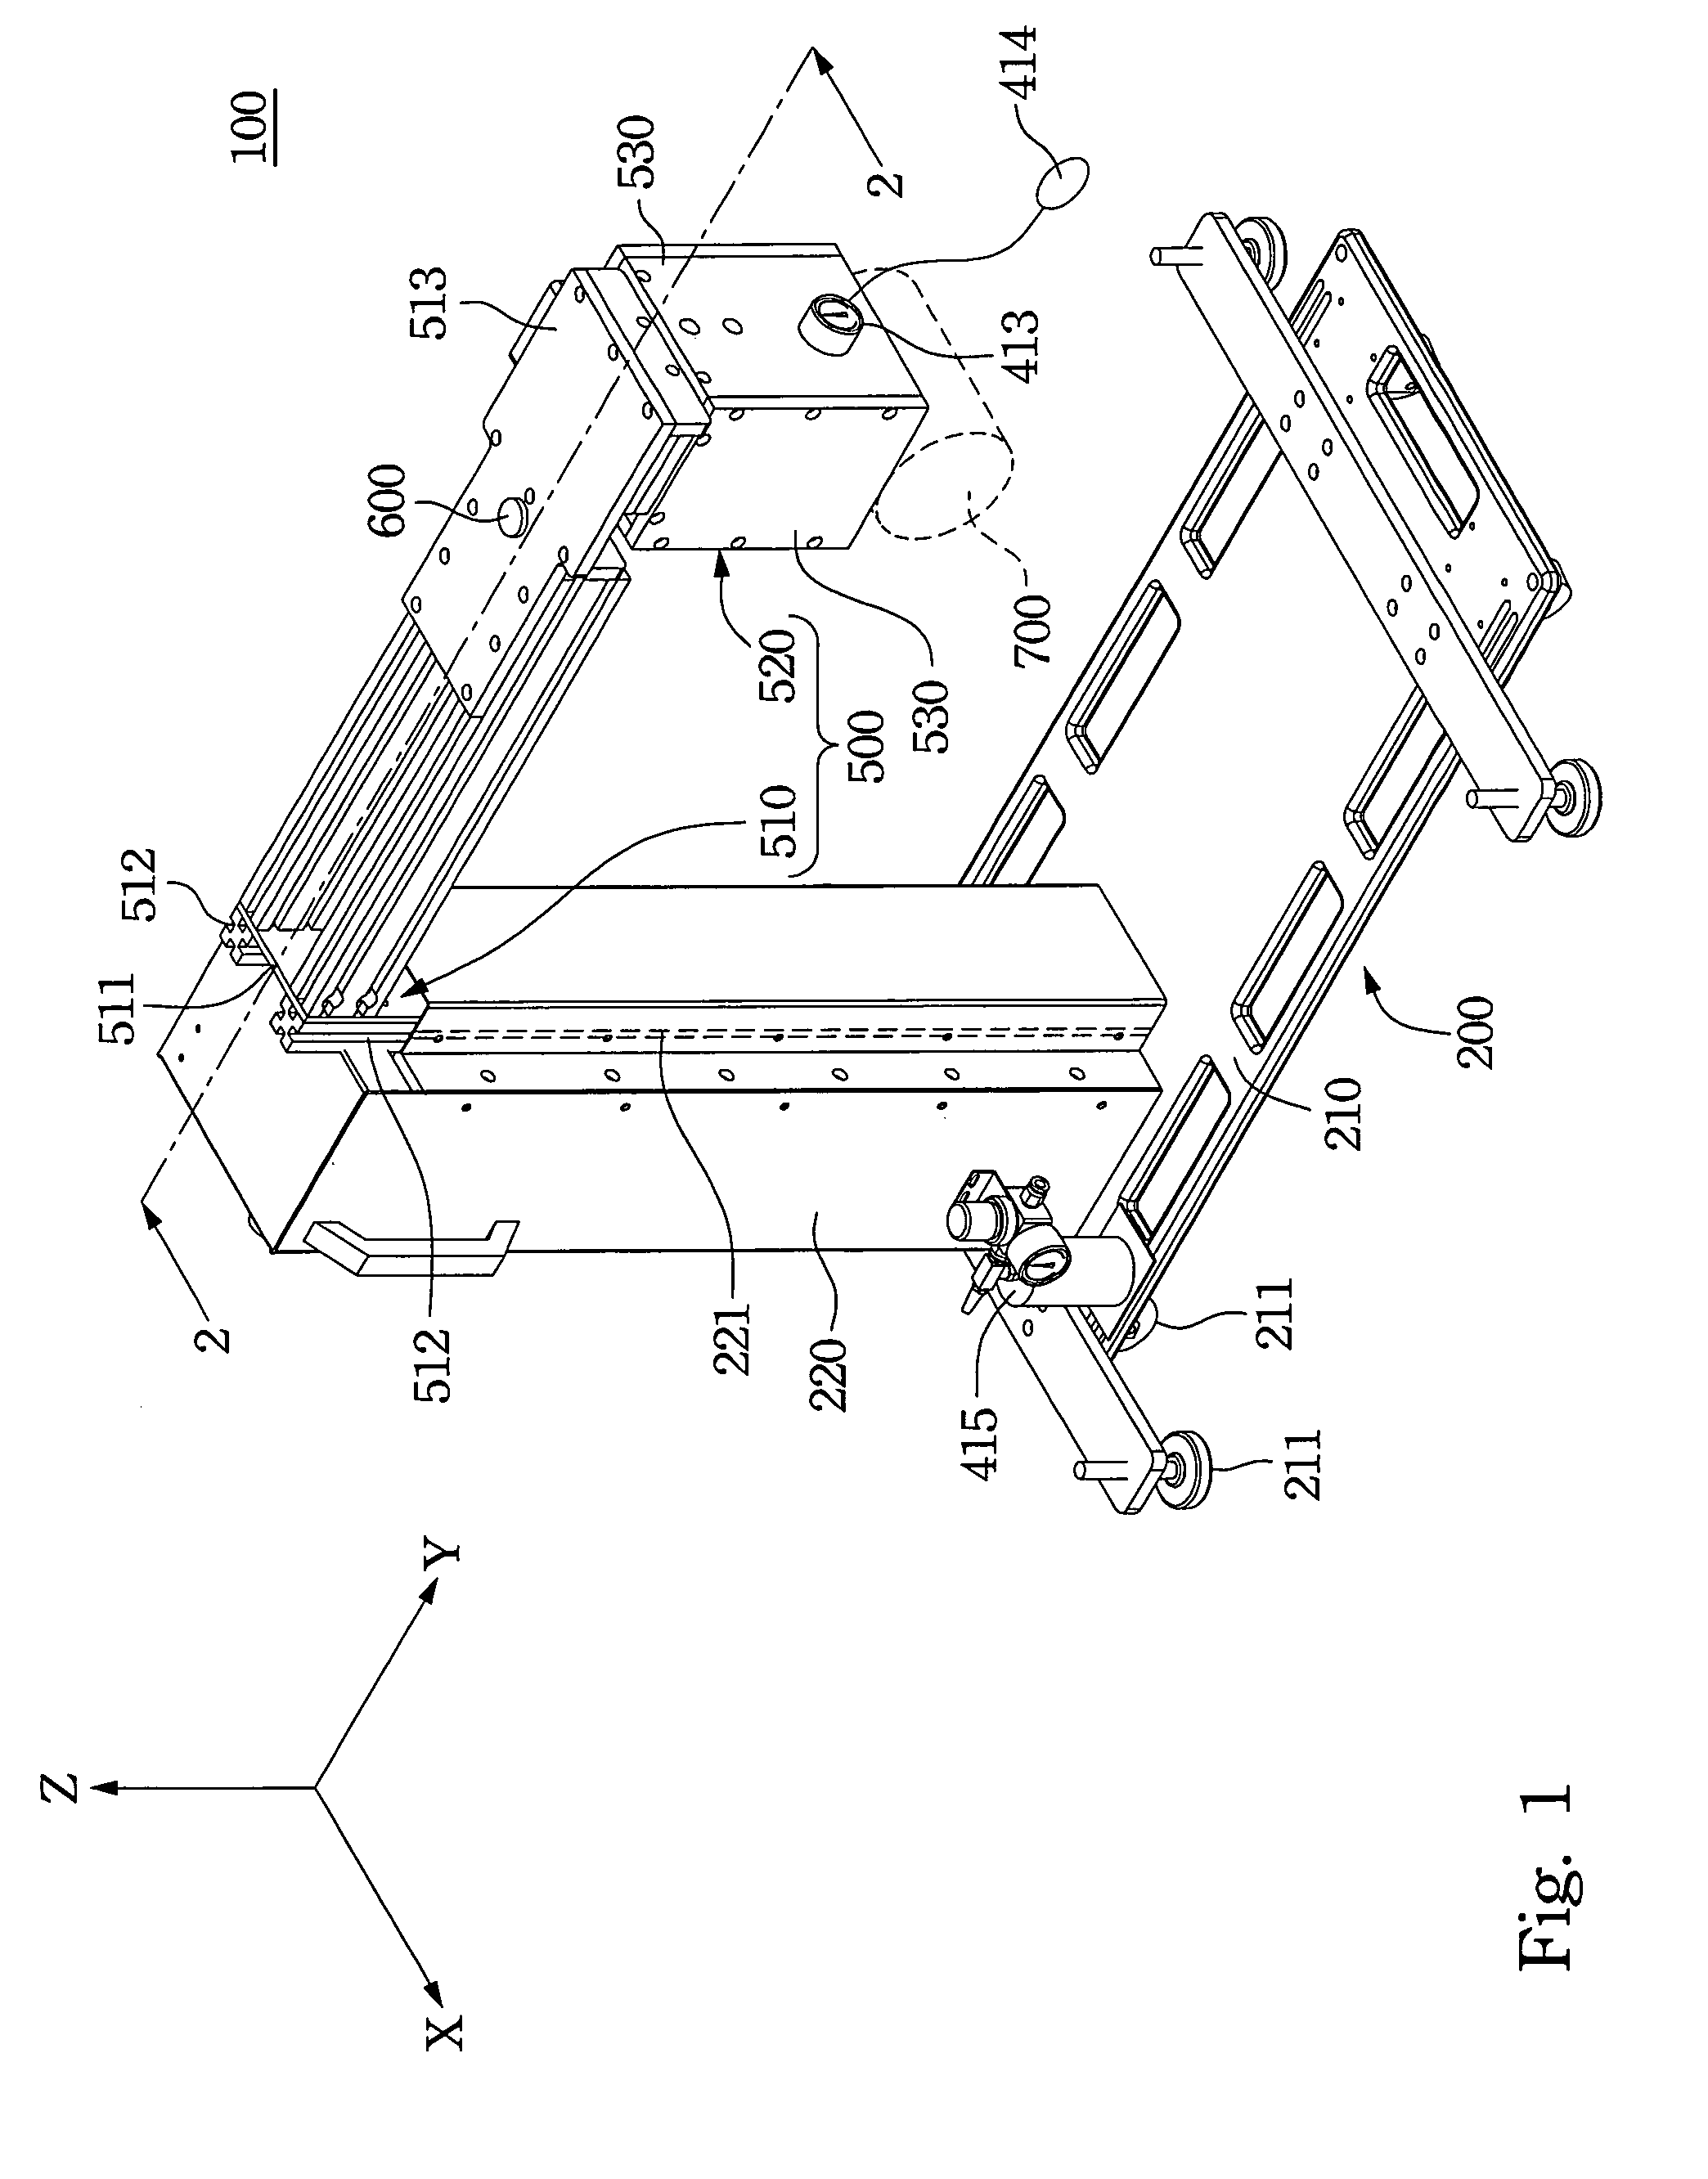 Vibration wave output instrument and method of using the same